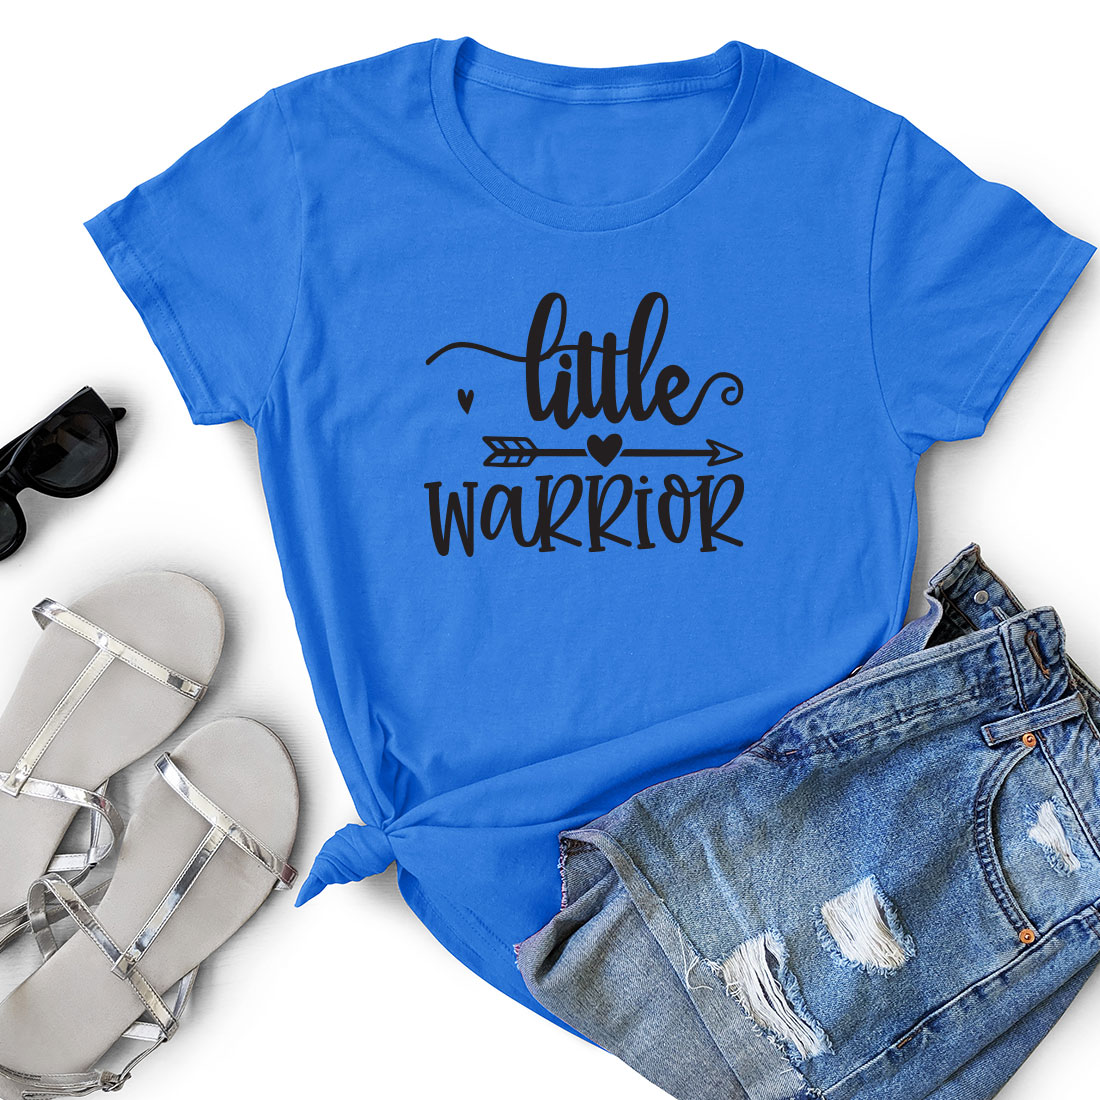 Blue shirt that says little warrior next to a pair of shorts.